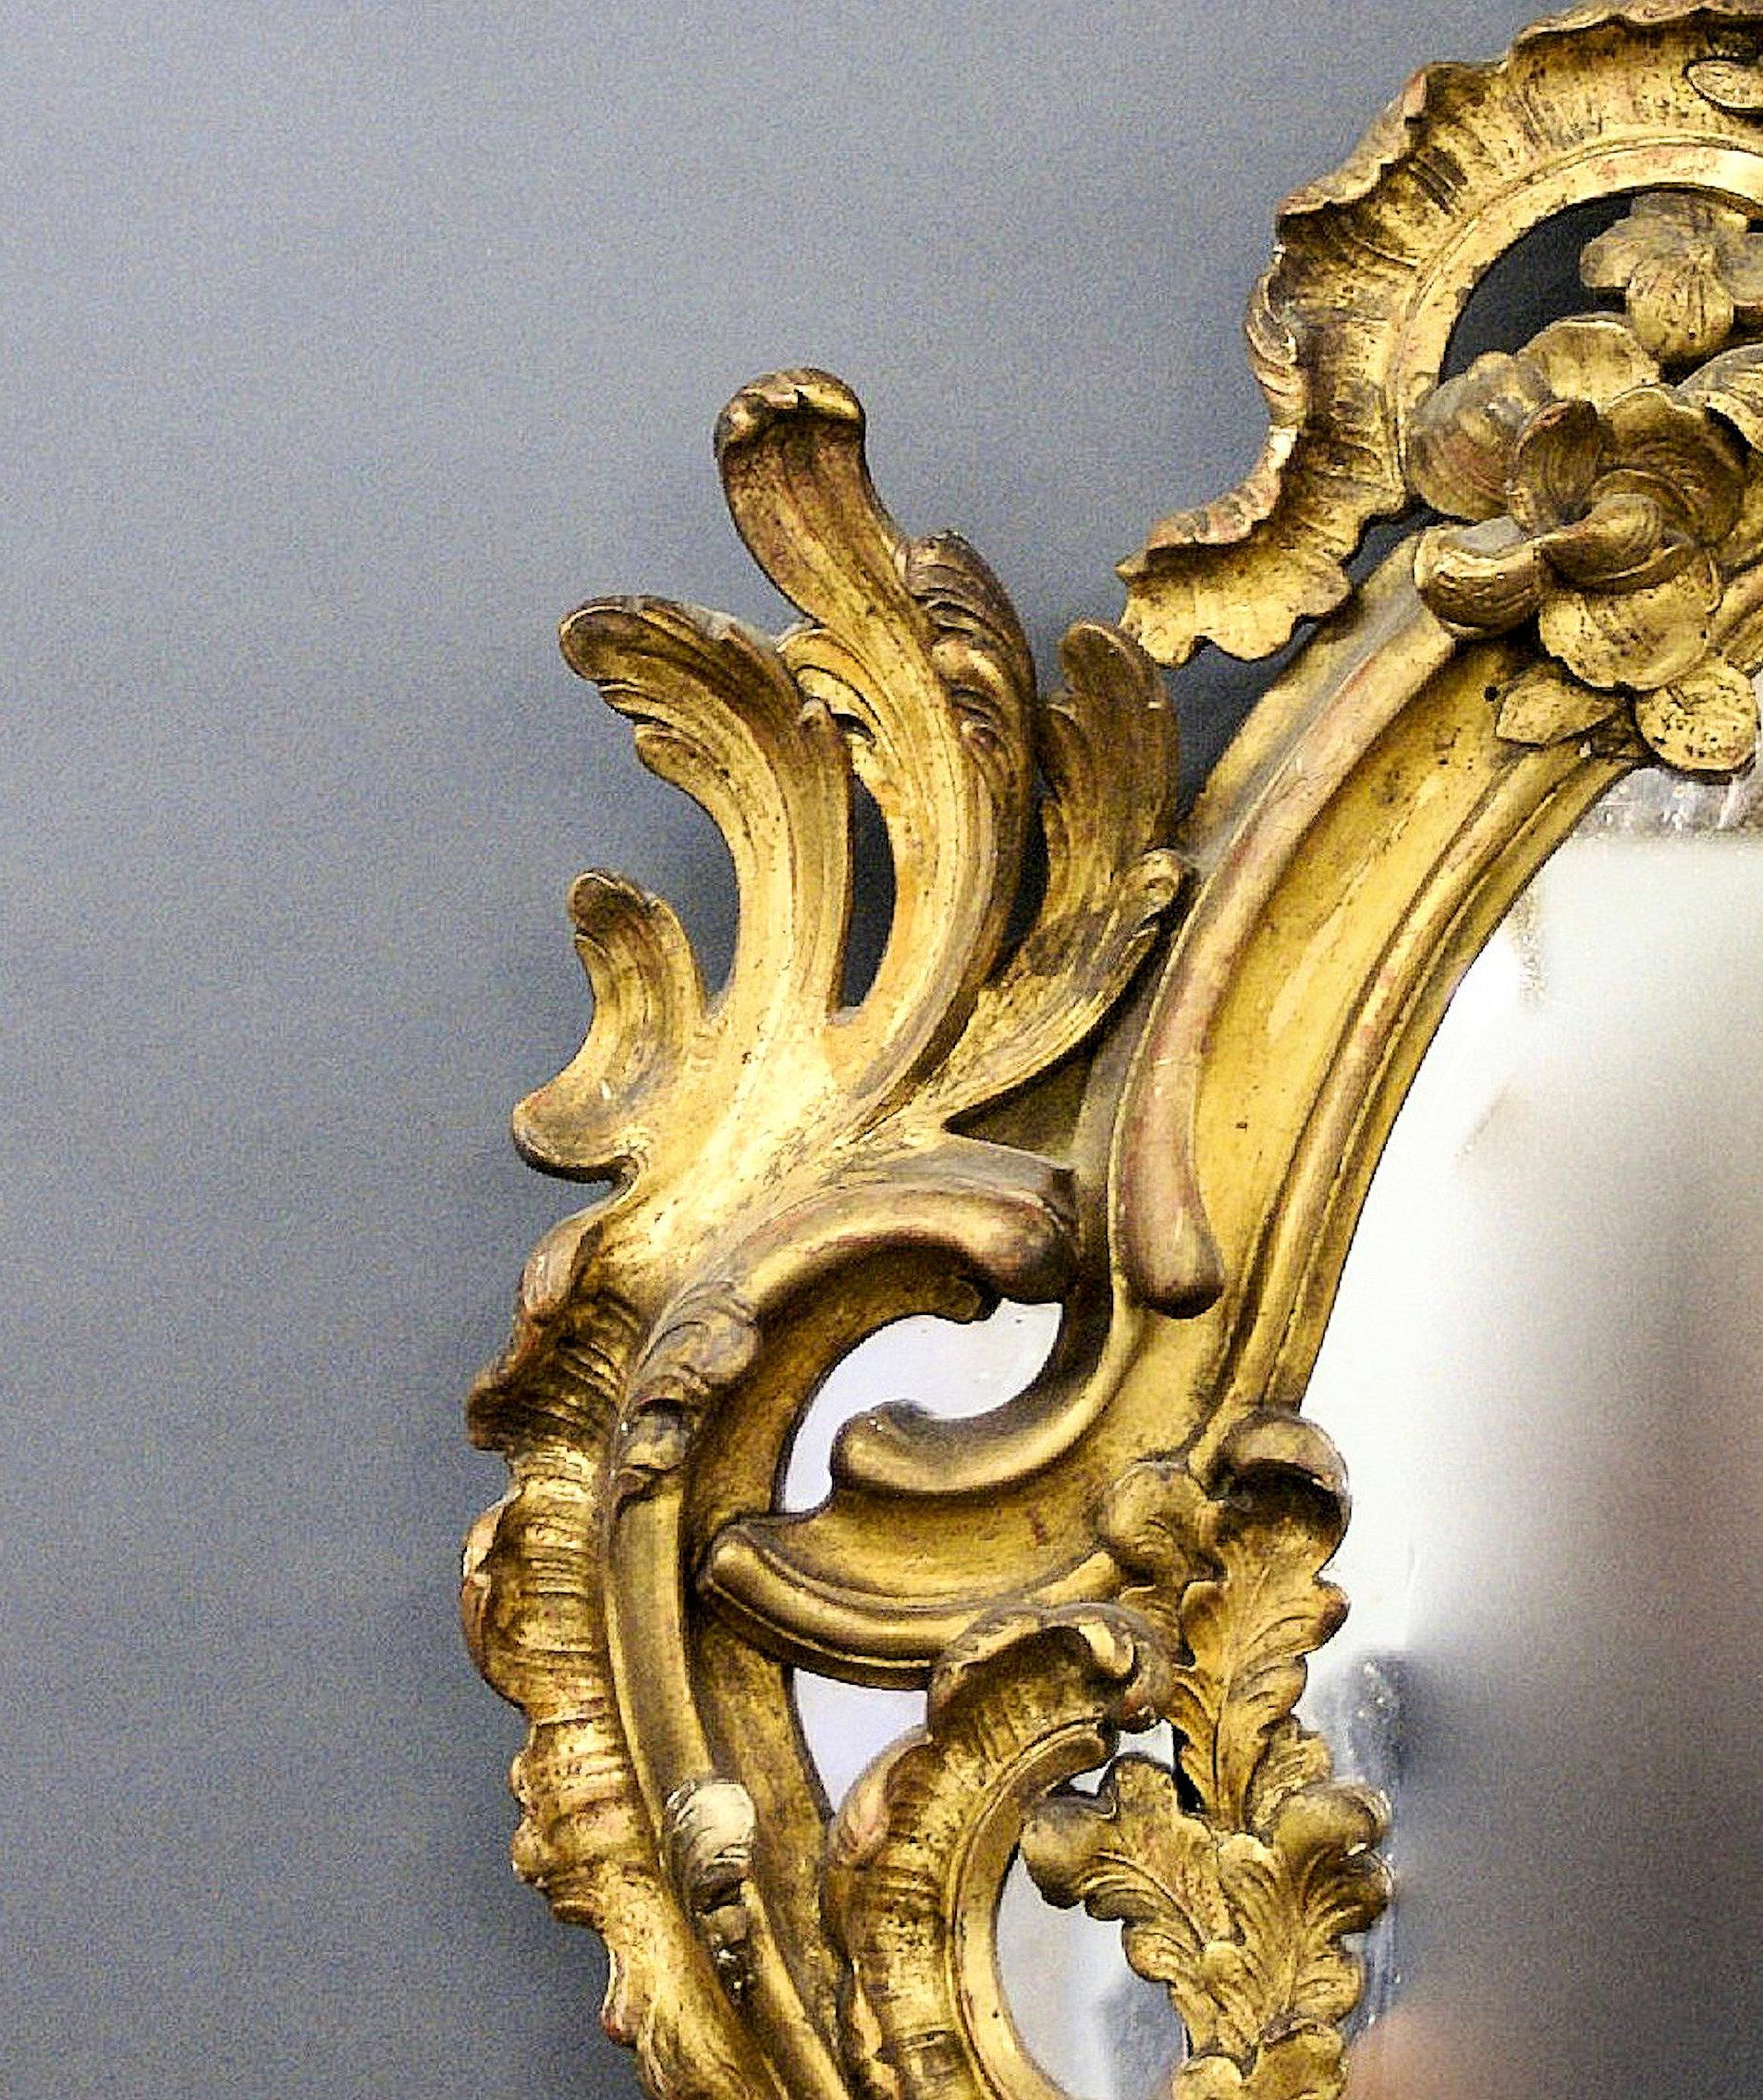 This beautiful and very large 19th C. carved wood gilt French wall mirror is Rococo in style and retains its original gilding, mirror plate and backing all in very good condition. The markings and blemishes commensurate with the age and does nothing